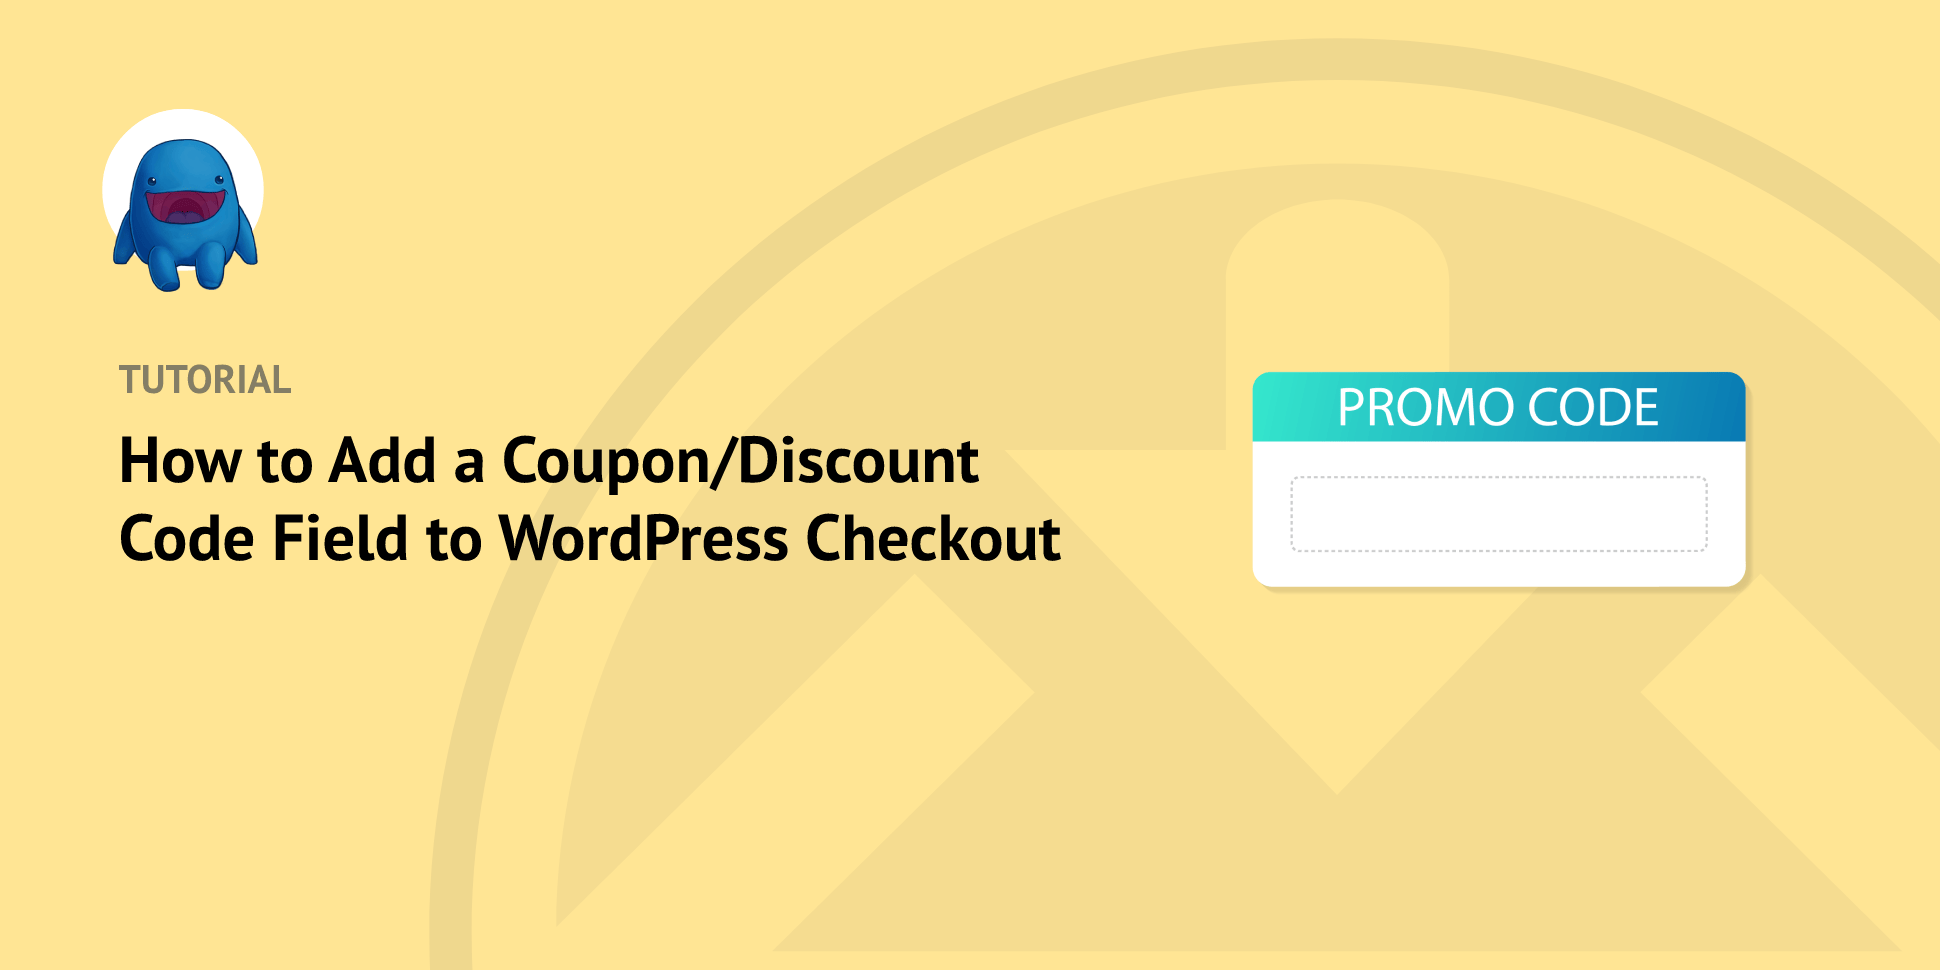 How to Add a Discount Code Field to WordPress Checkout Page